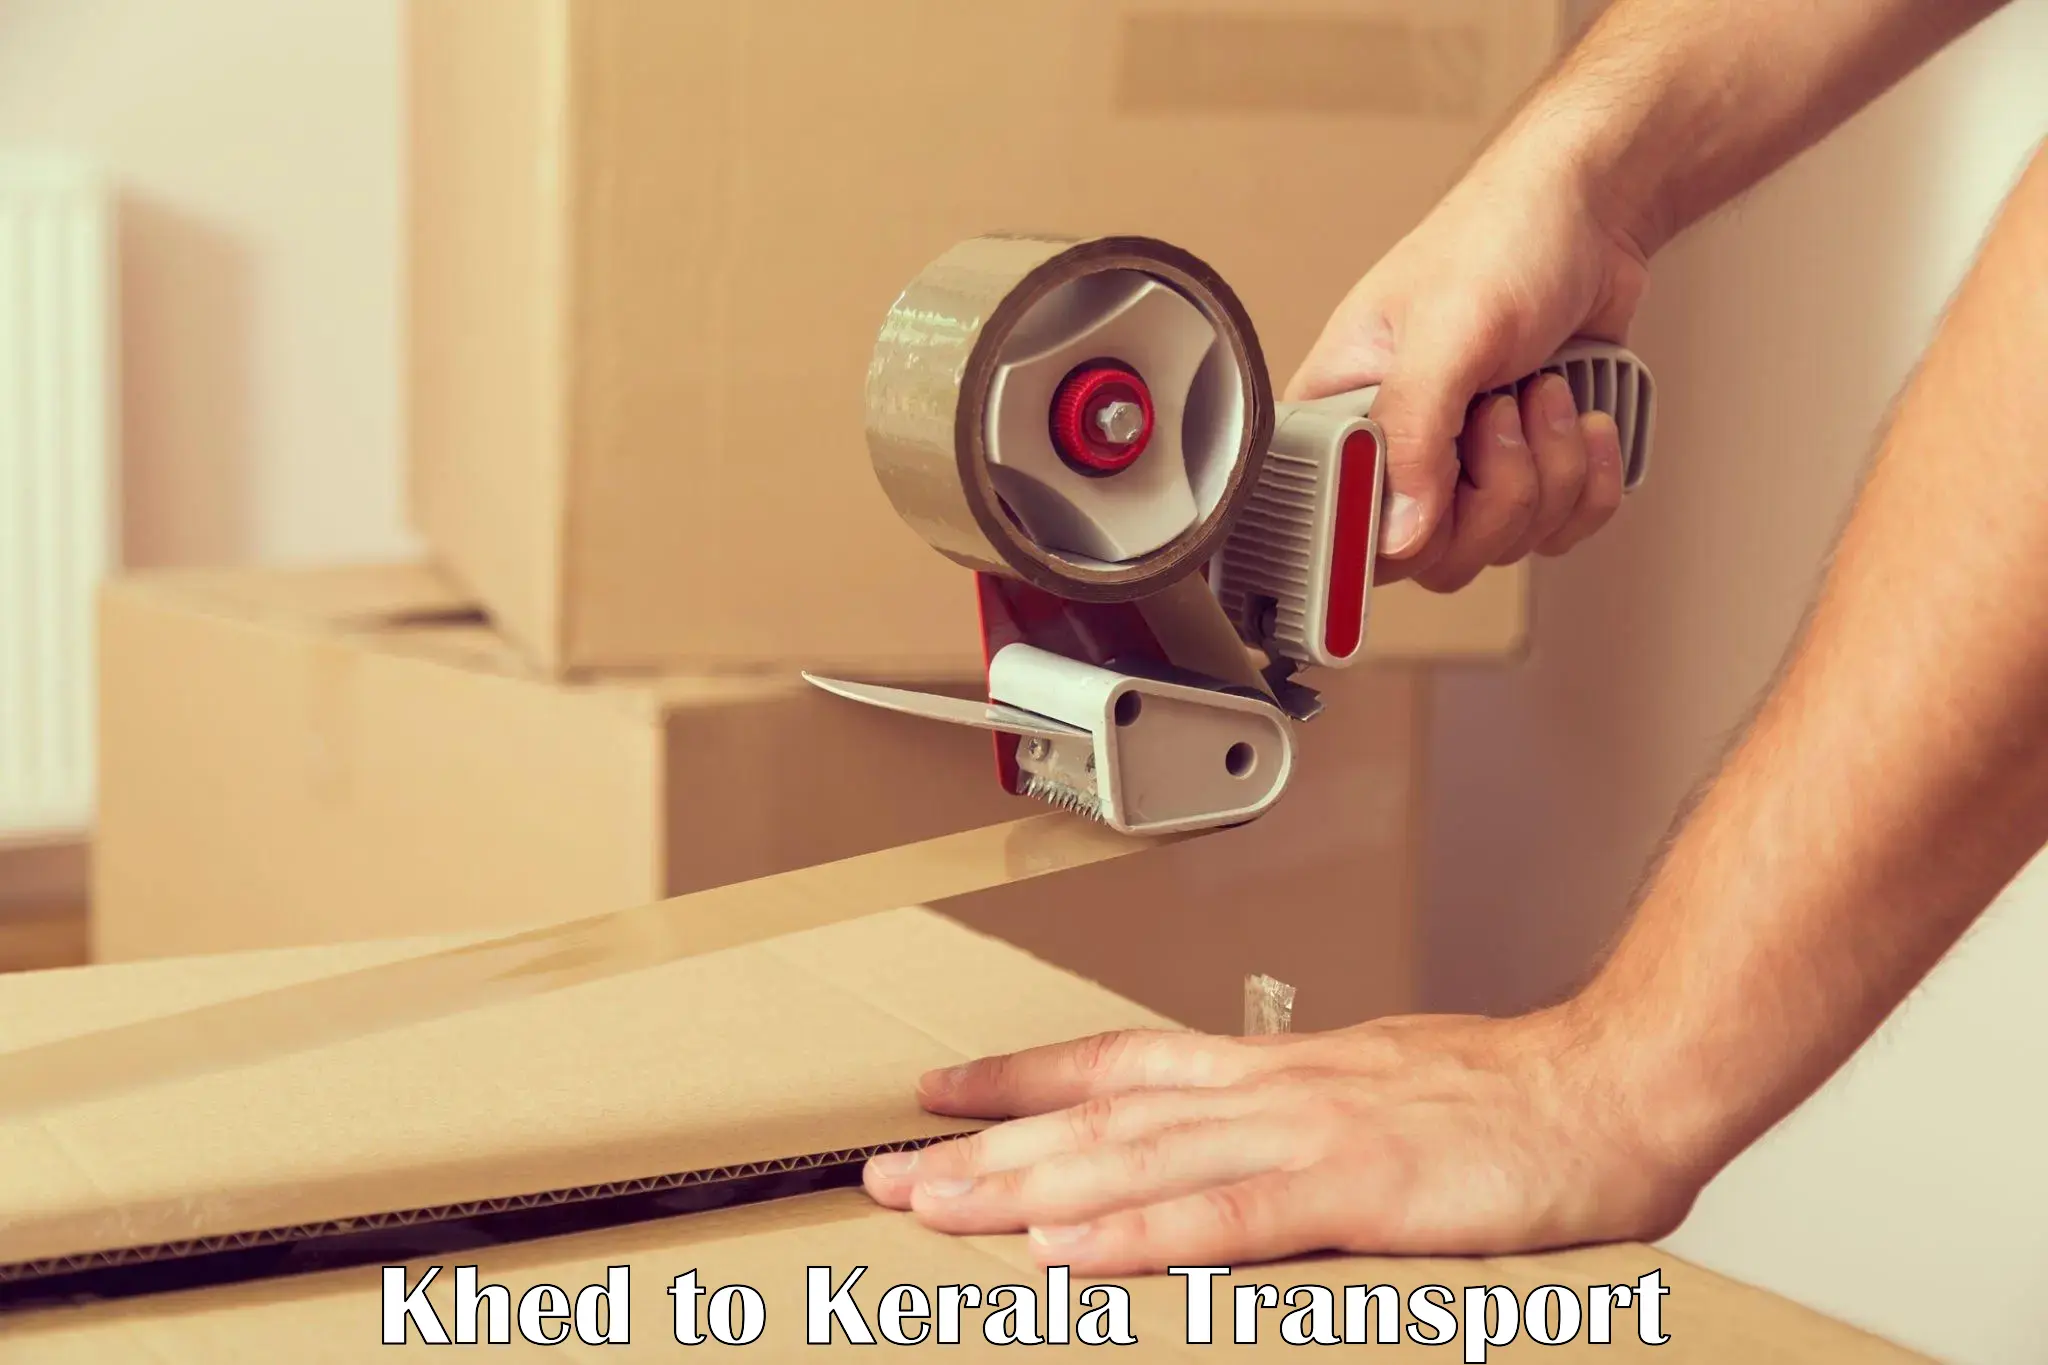 Air freight transport services in Khed to Kollam